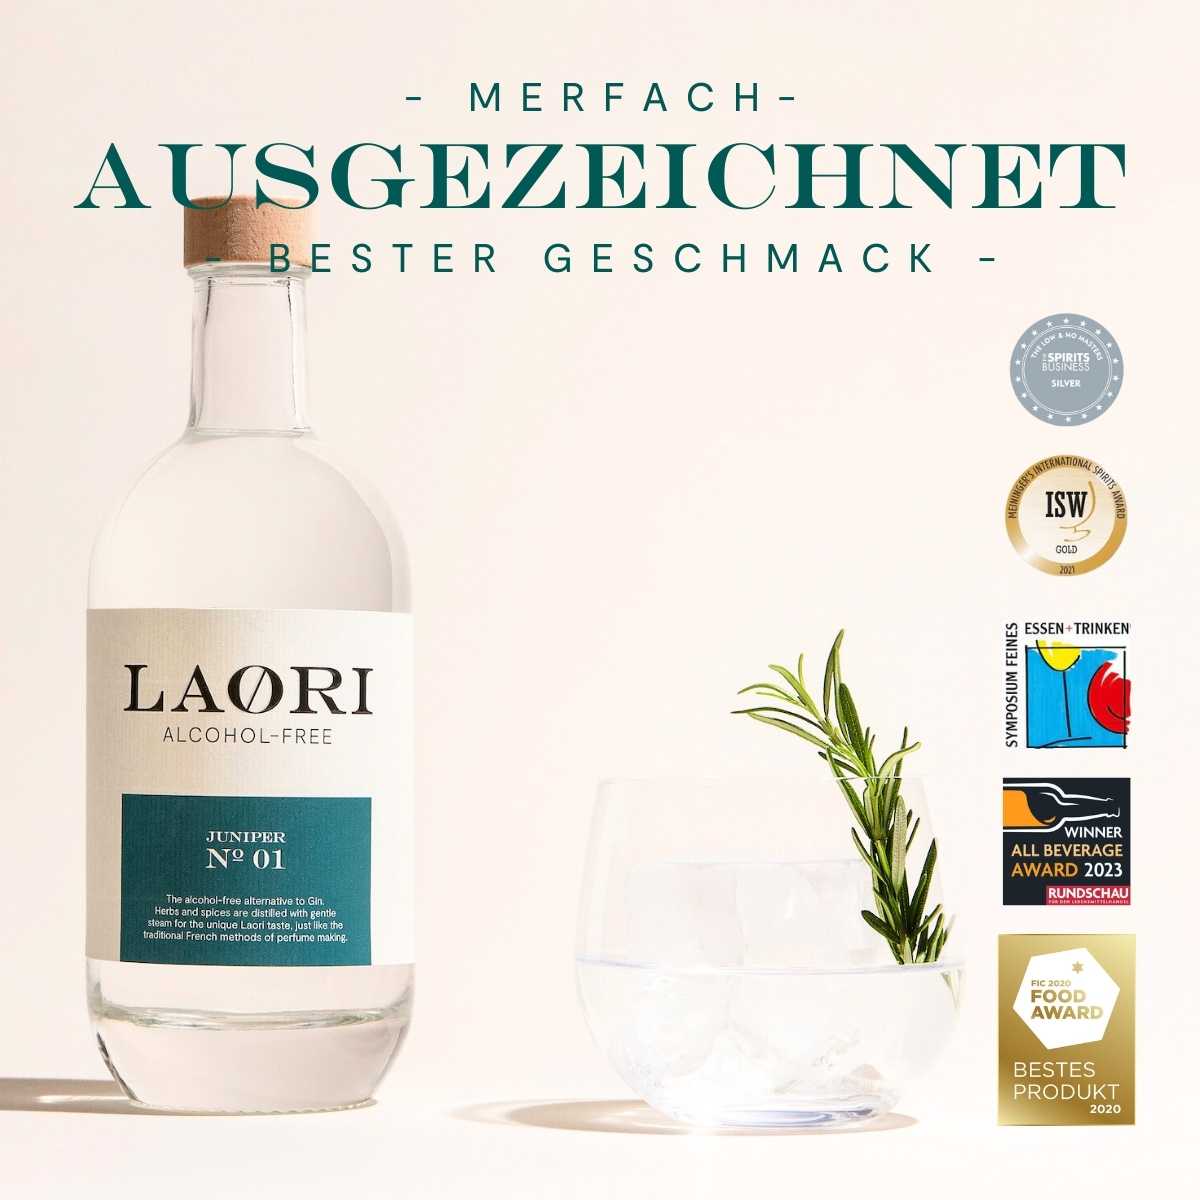 Gin Tonic Ampersand Pack - LiquoLivery